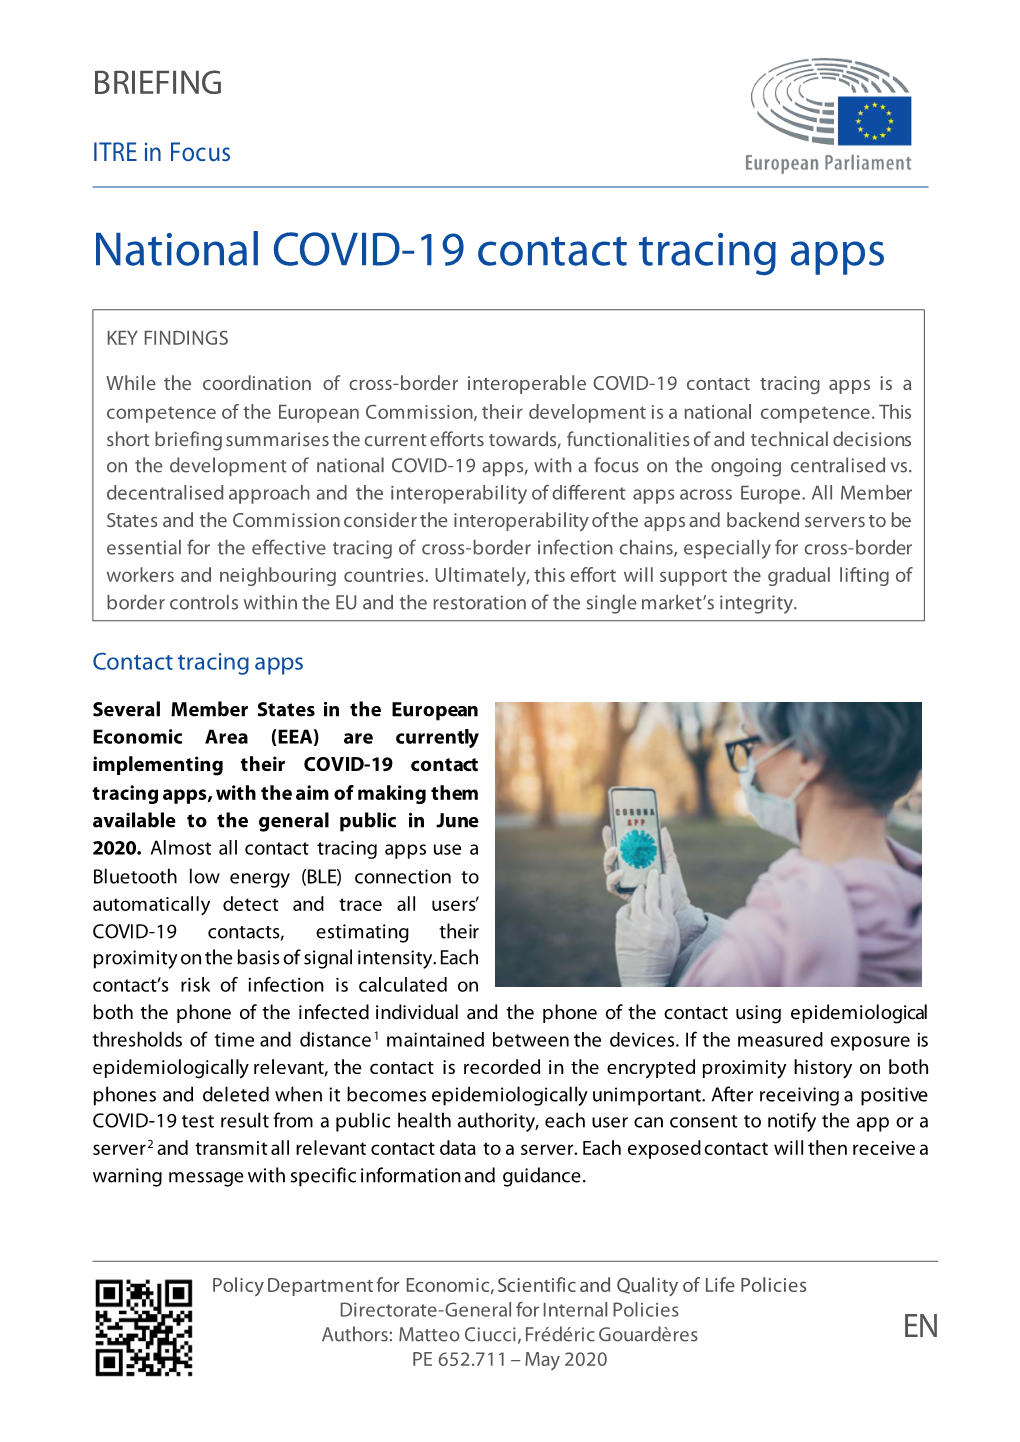 National COVID-19 Contact Tracing Apps